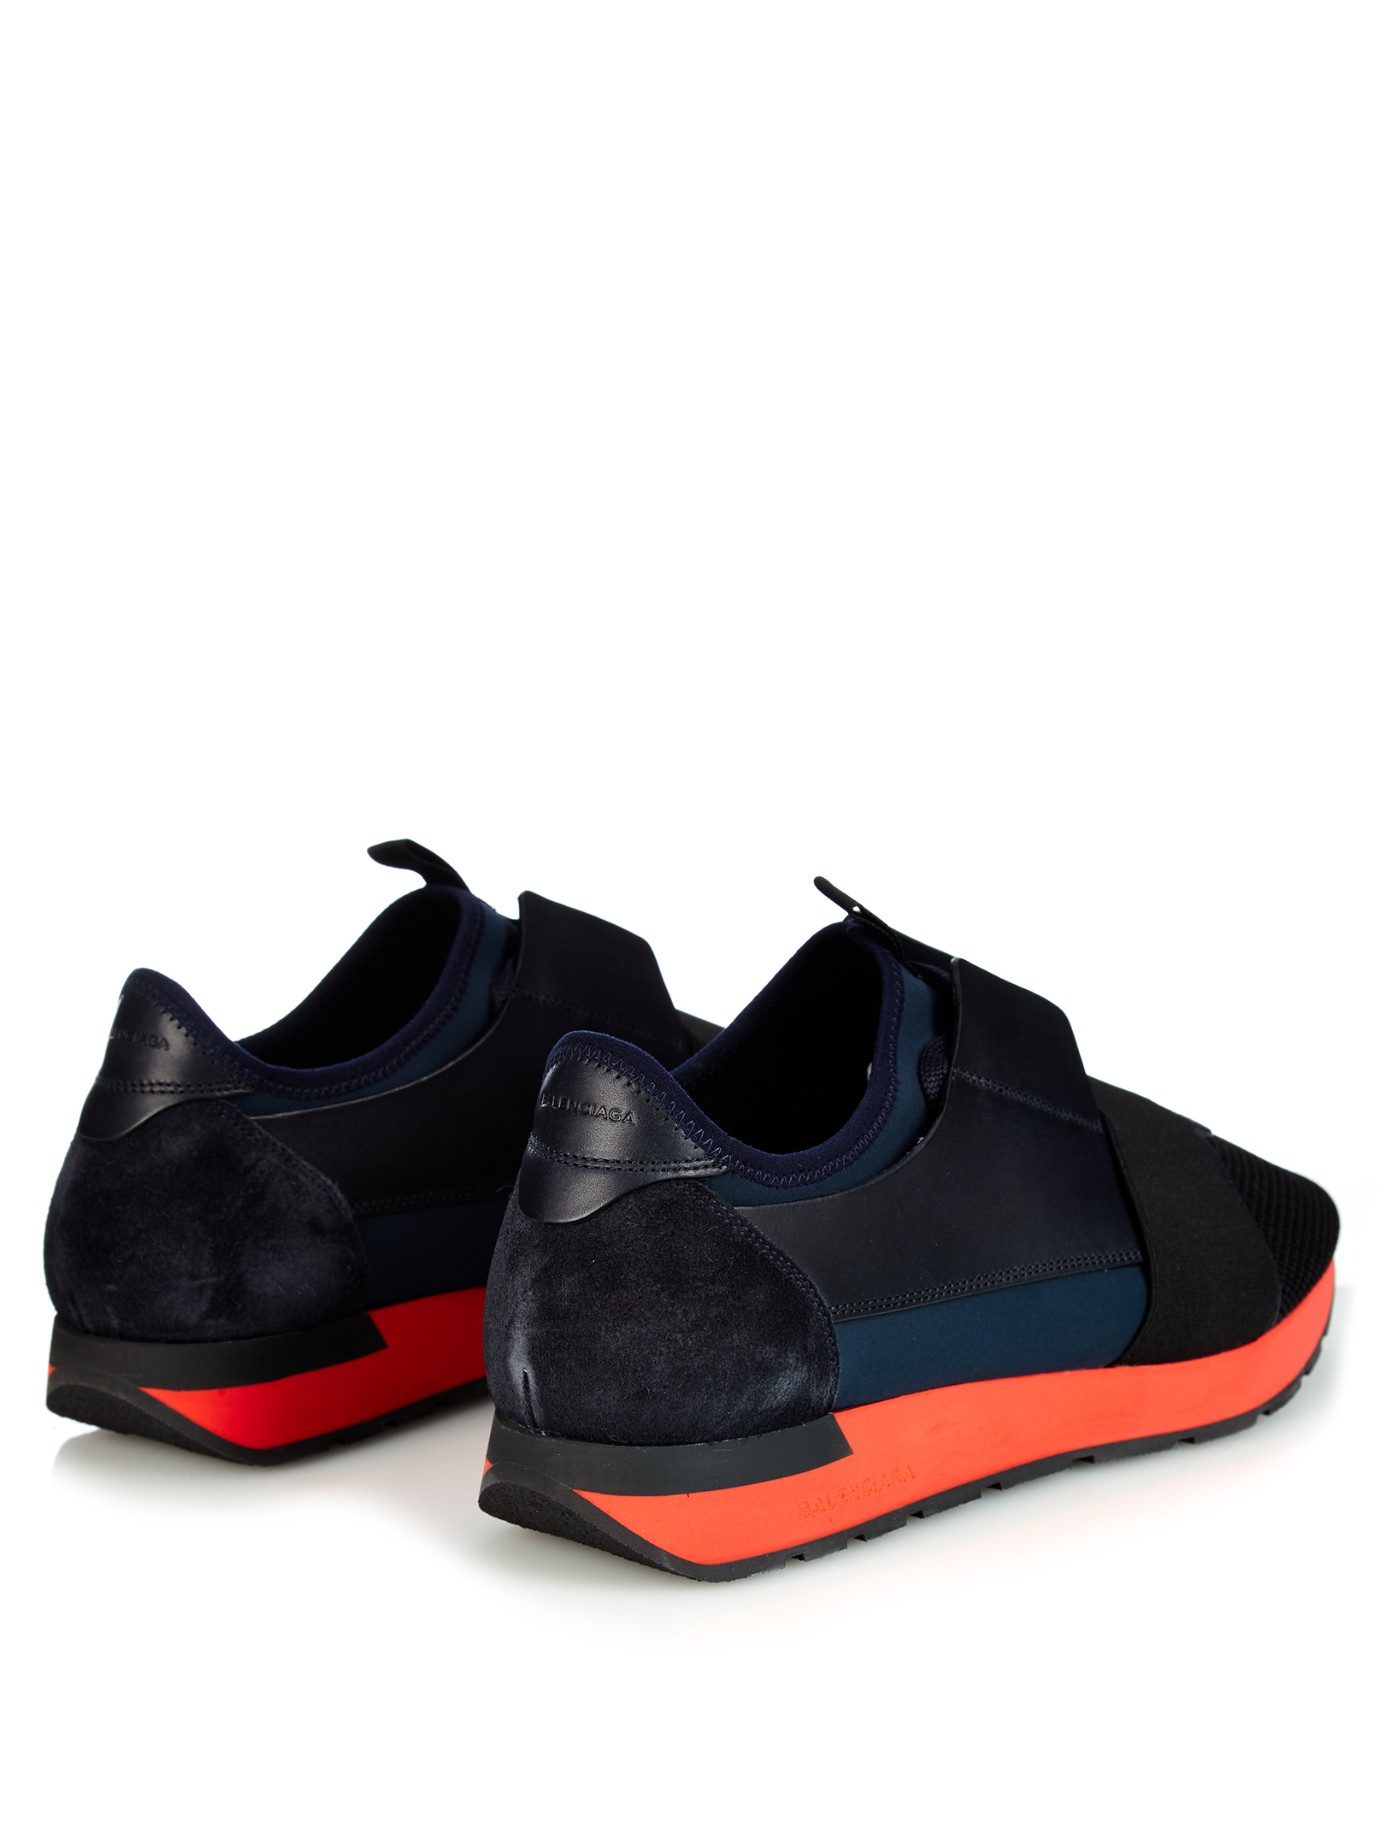 Lyst Balenciaga Paneled Leather and Suede Sneakers in